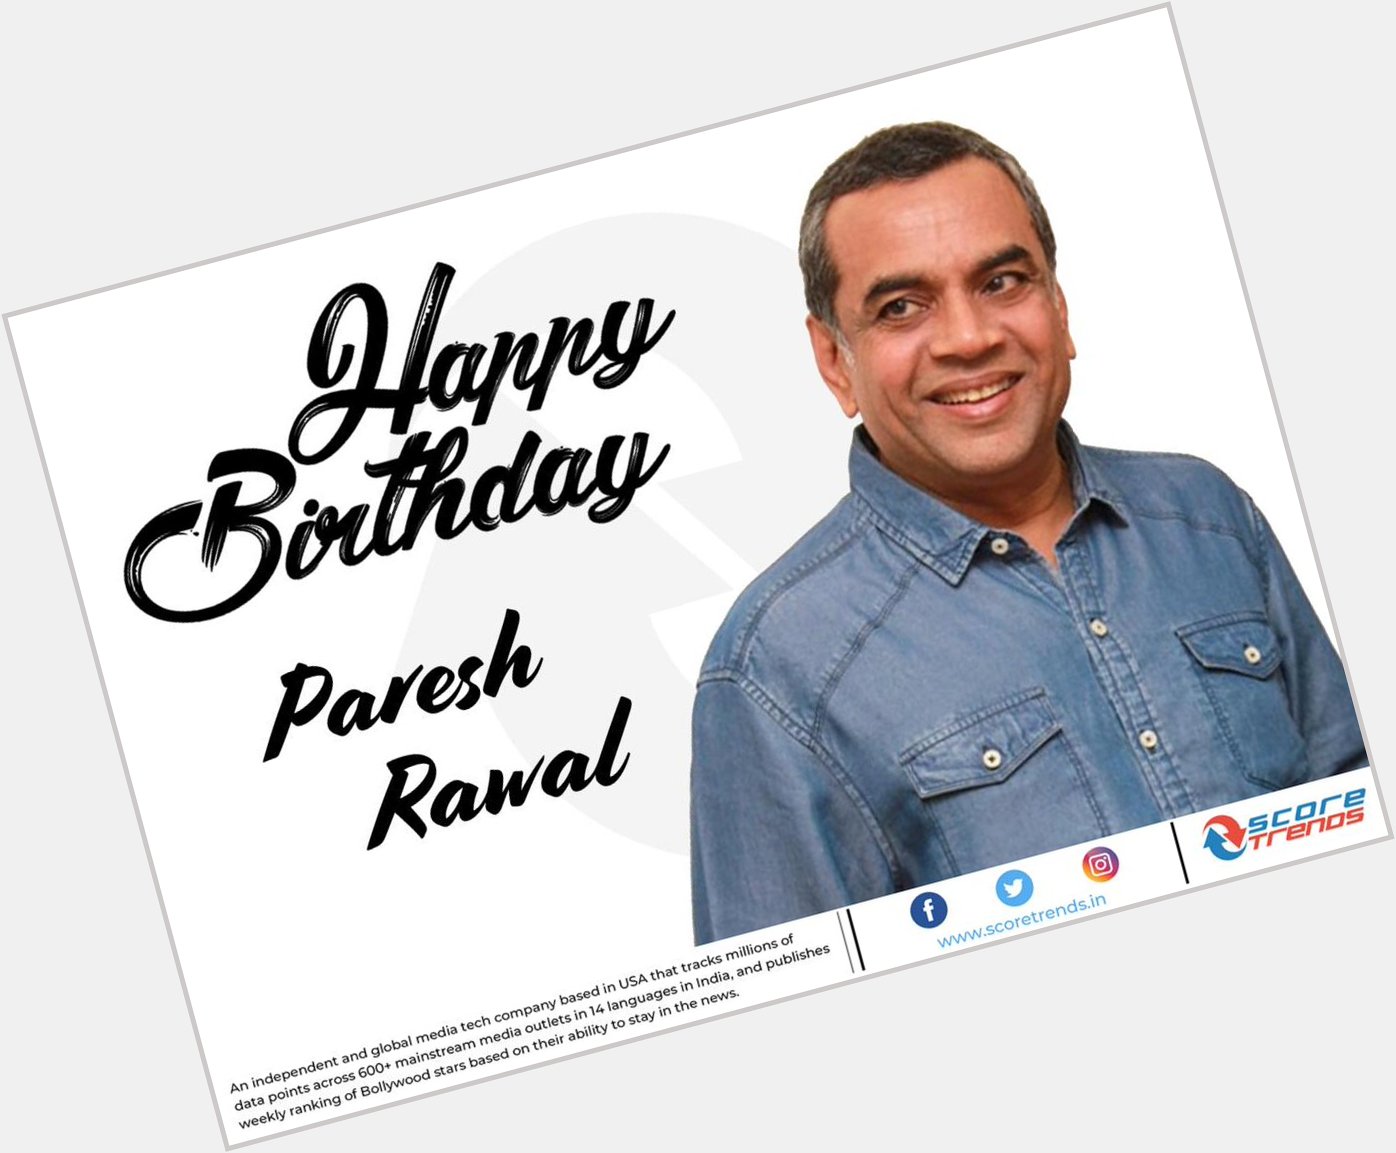 Score Trends wishes Paresh Rawal a Happy Birthday!! 